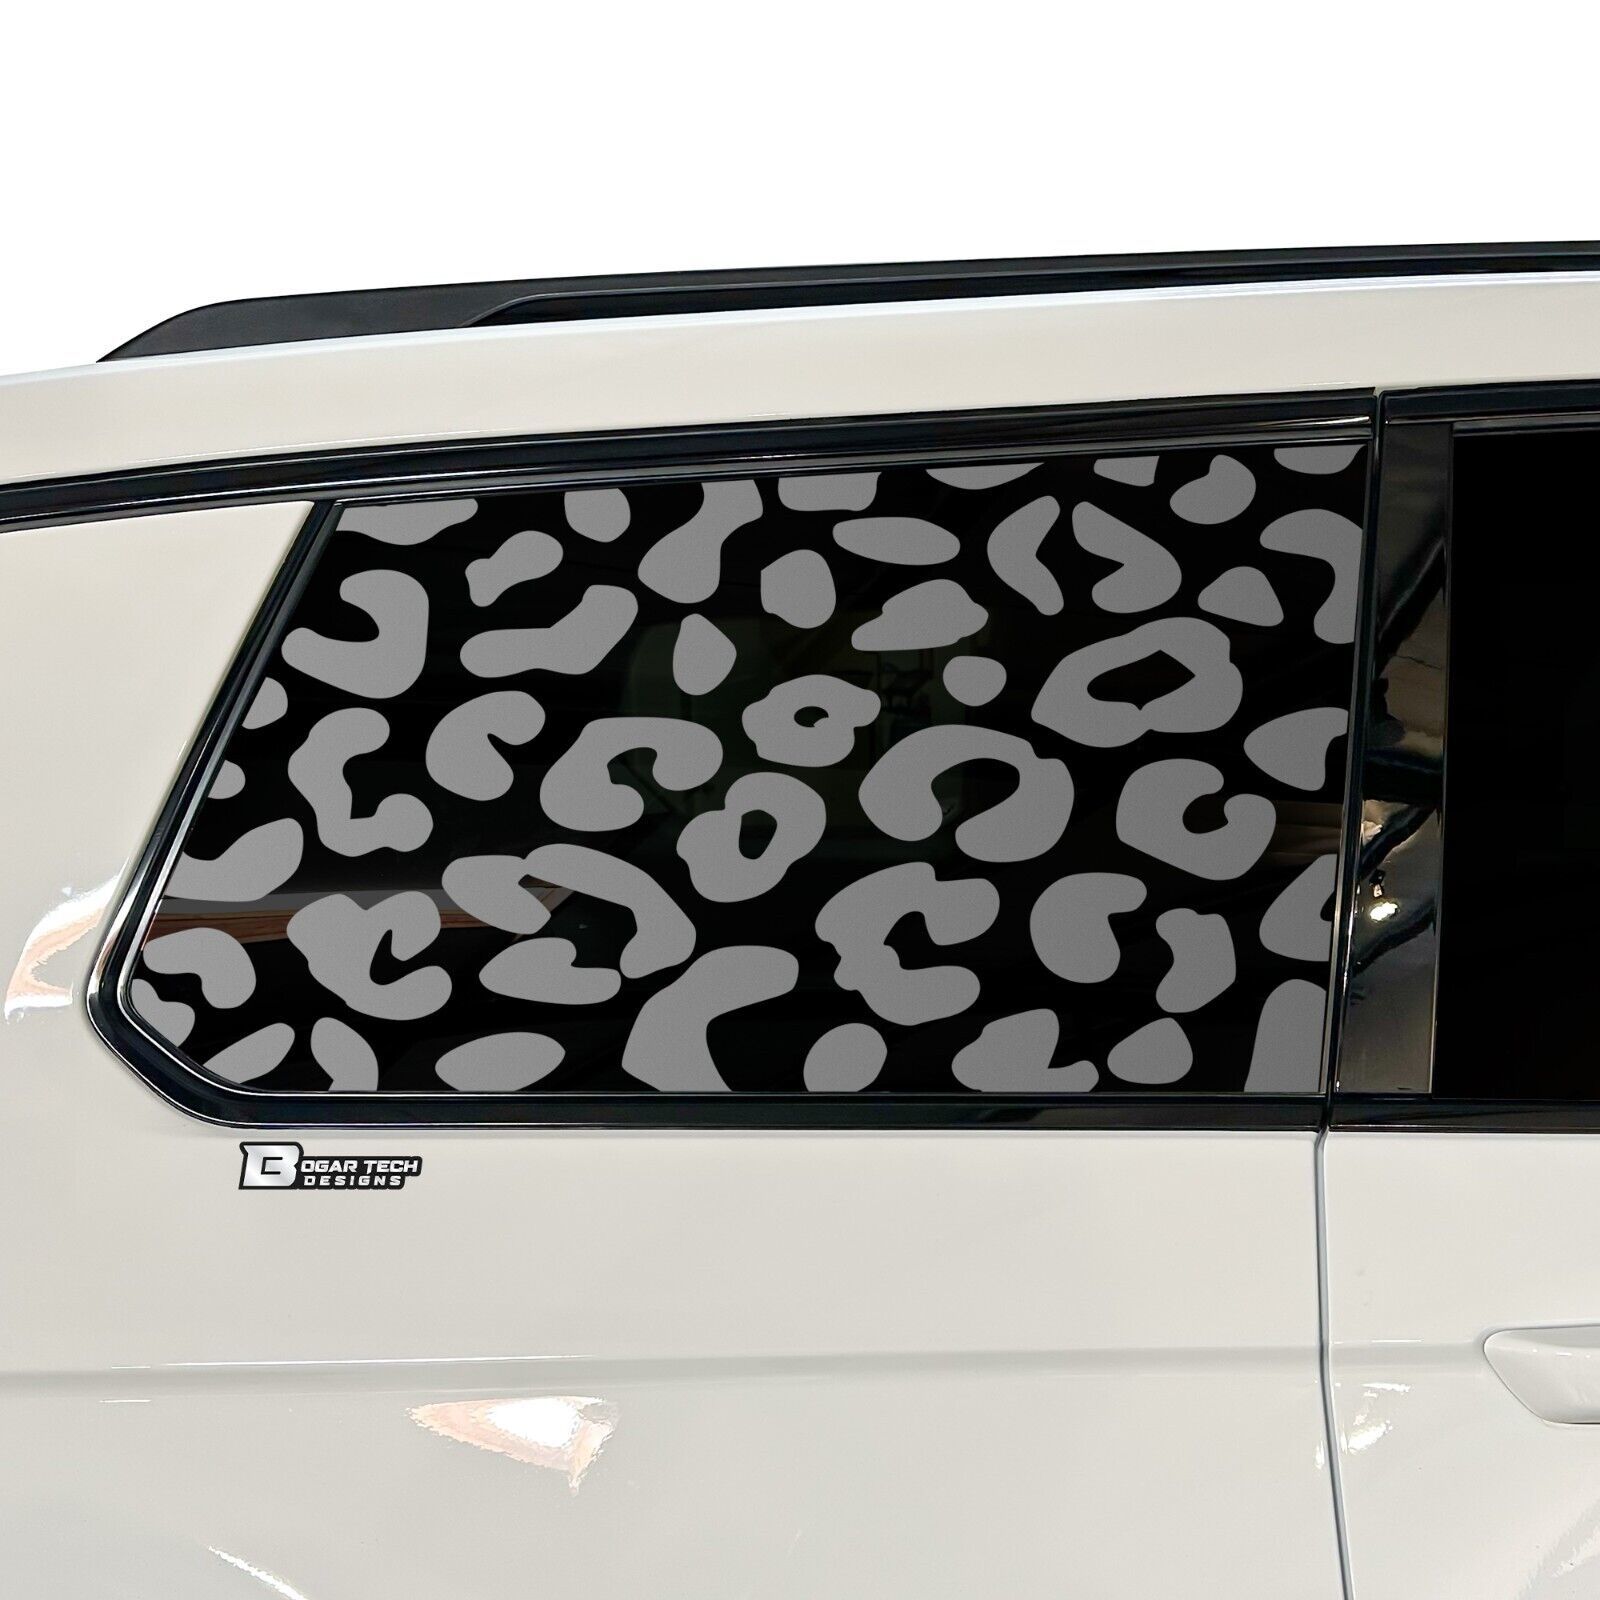 Primary image for Fits Jeep Grand Cherokee L 2021-2023 Leopard Cheetah Print Window Decal Sticker